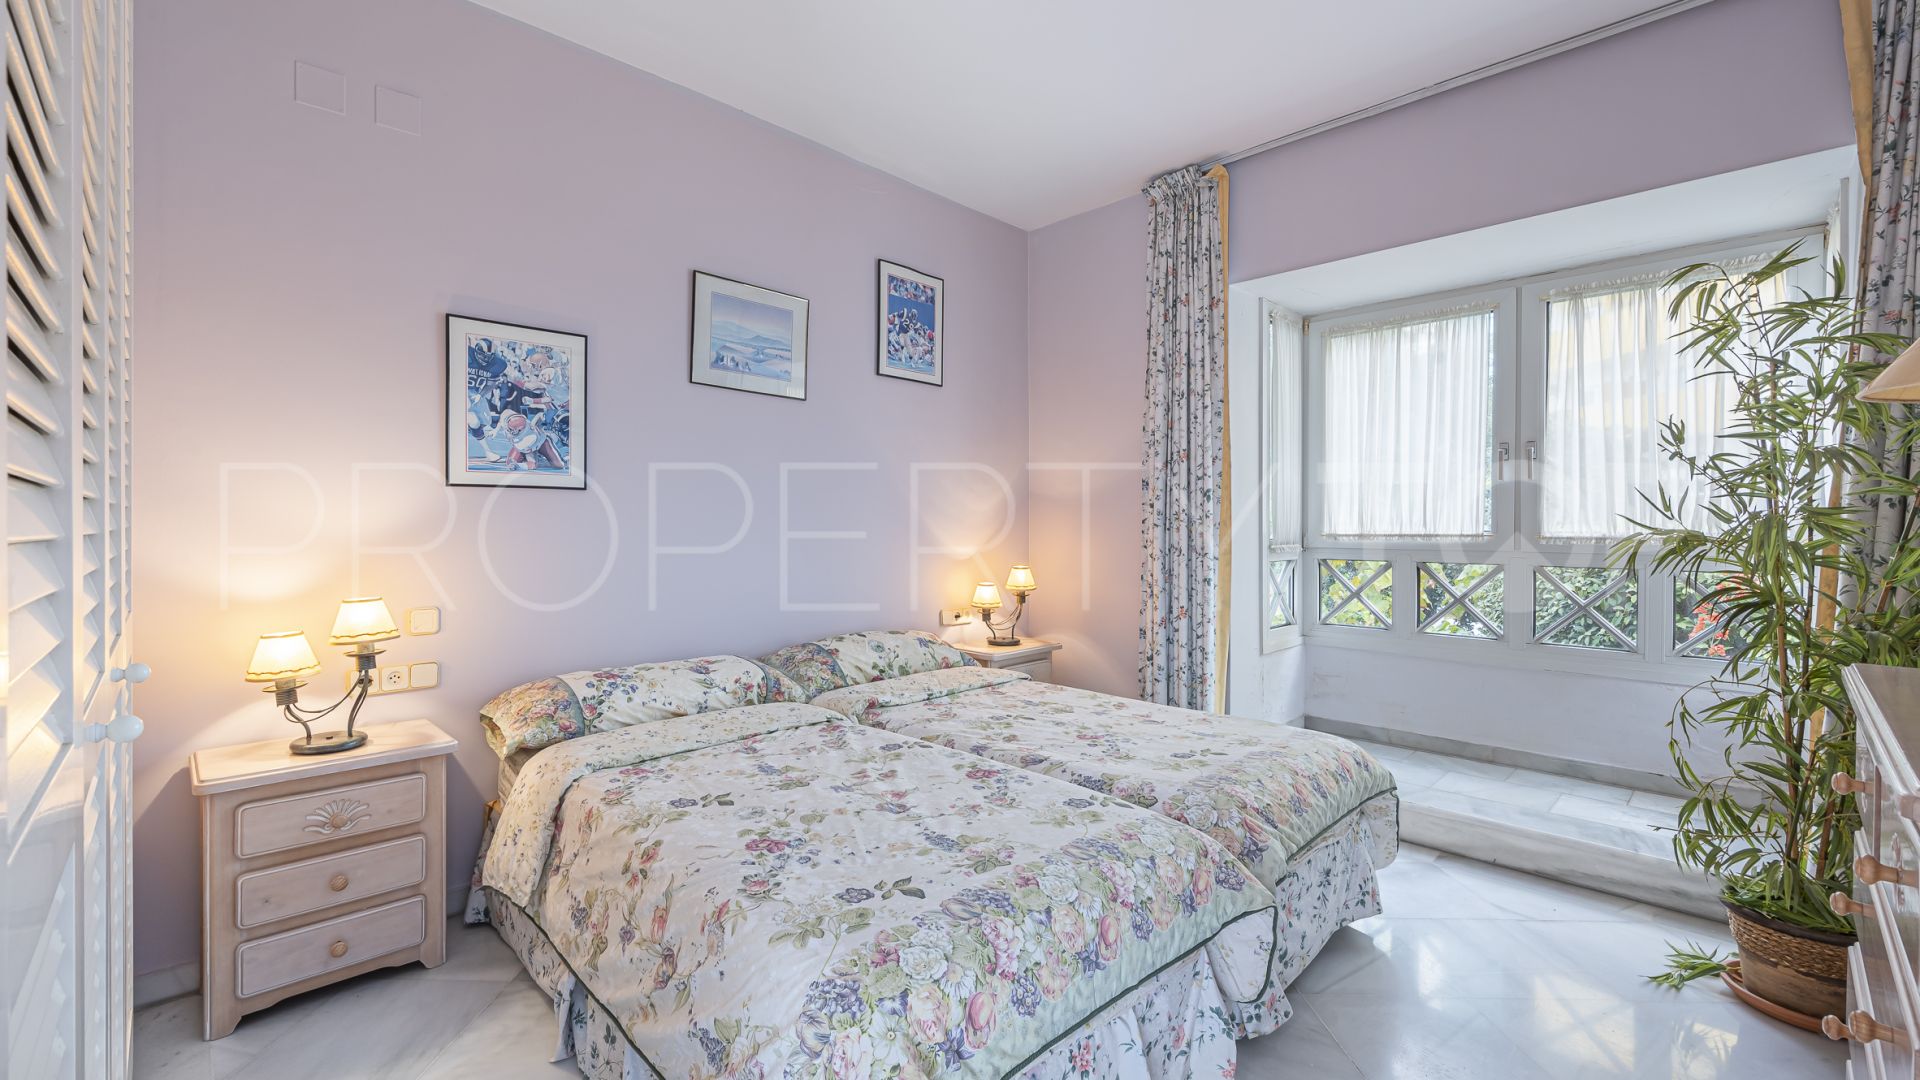 For sale Alhambra del Mar duplex penthouse with 3 bedrooms